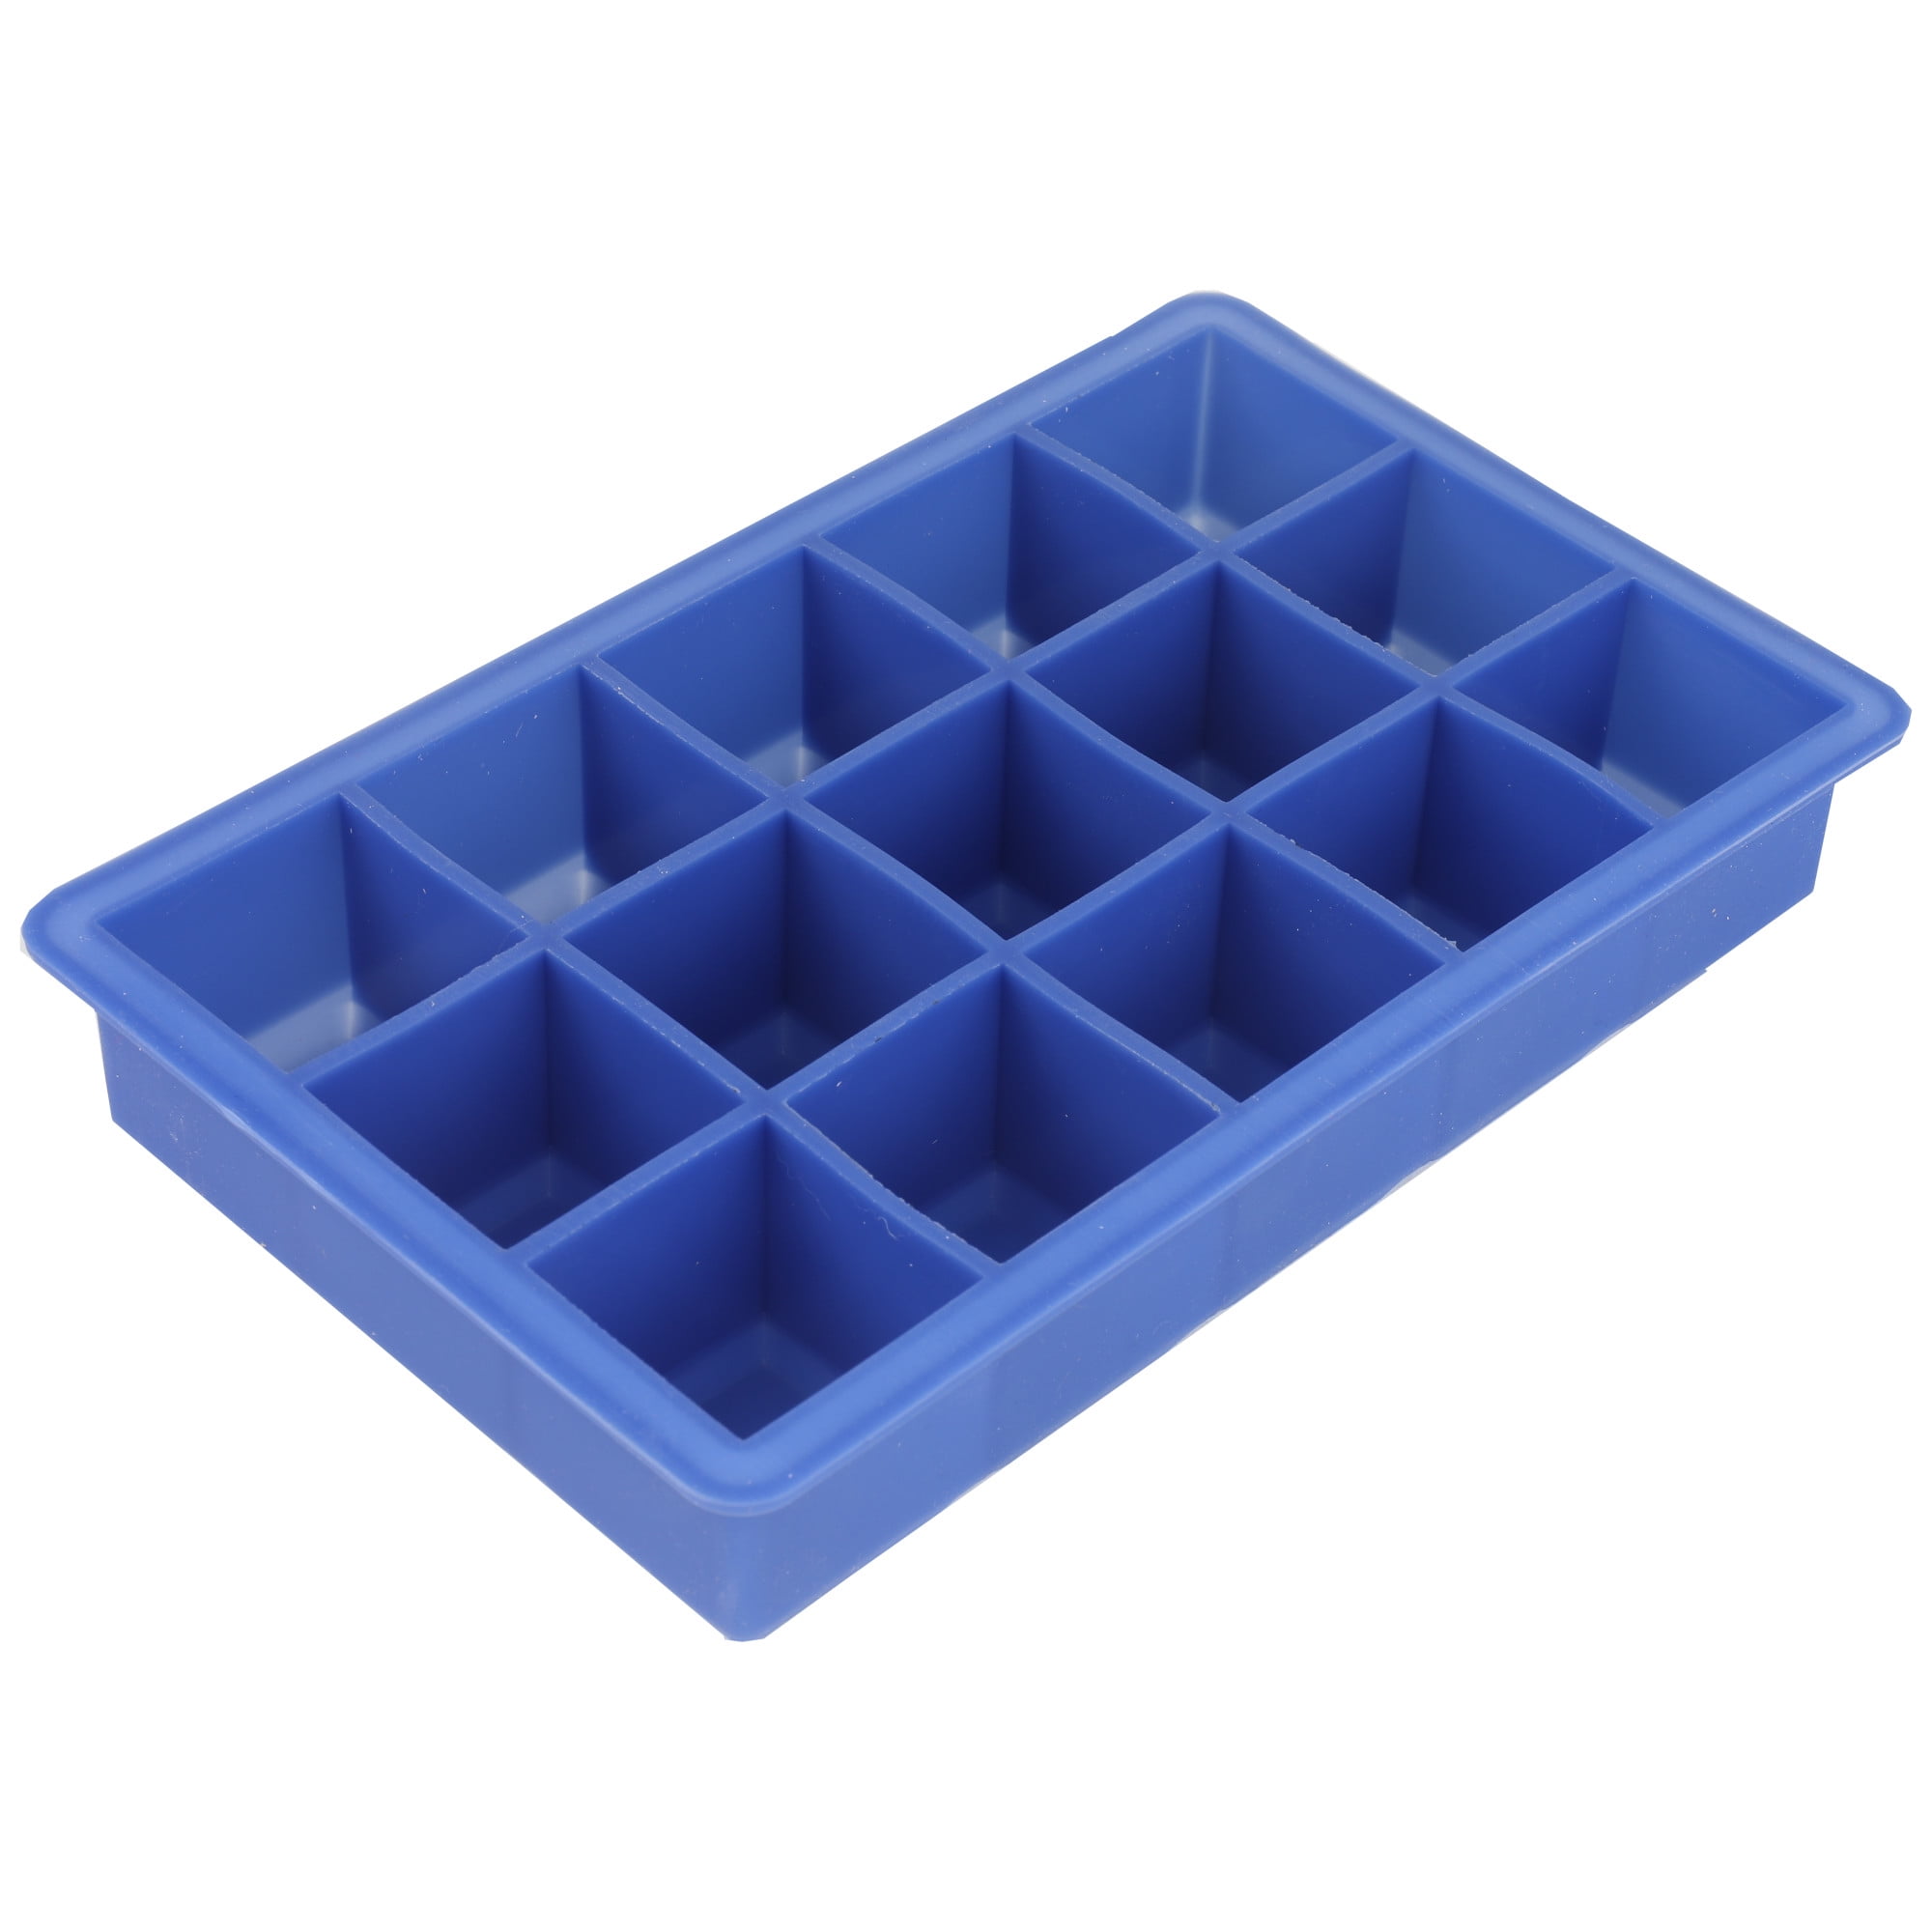 2329141 15 Cube Silicone Ice Cube Tray - Case Of 12